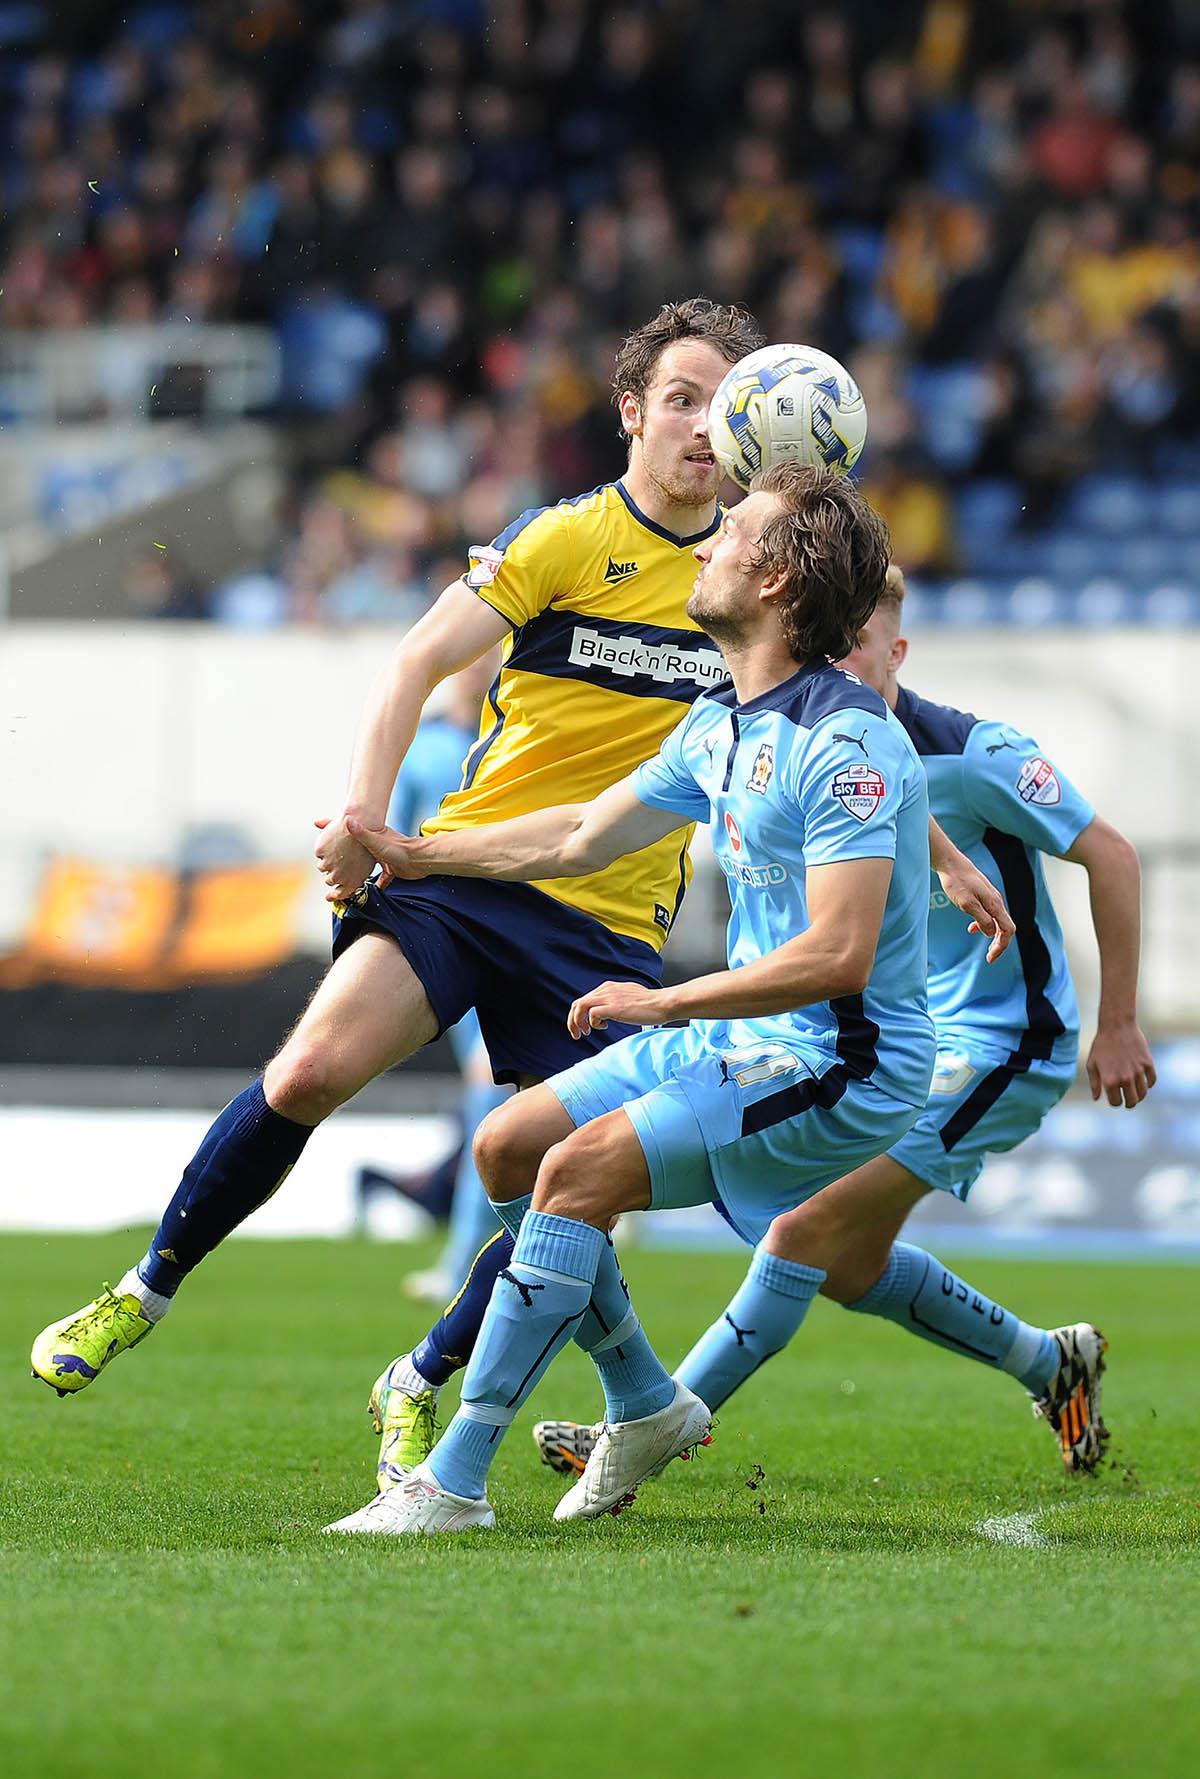 Oxford United V Cambridge United in pictures